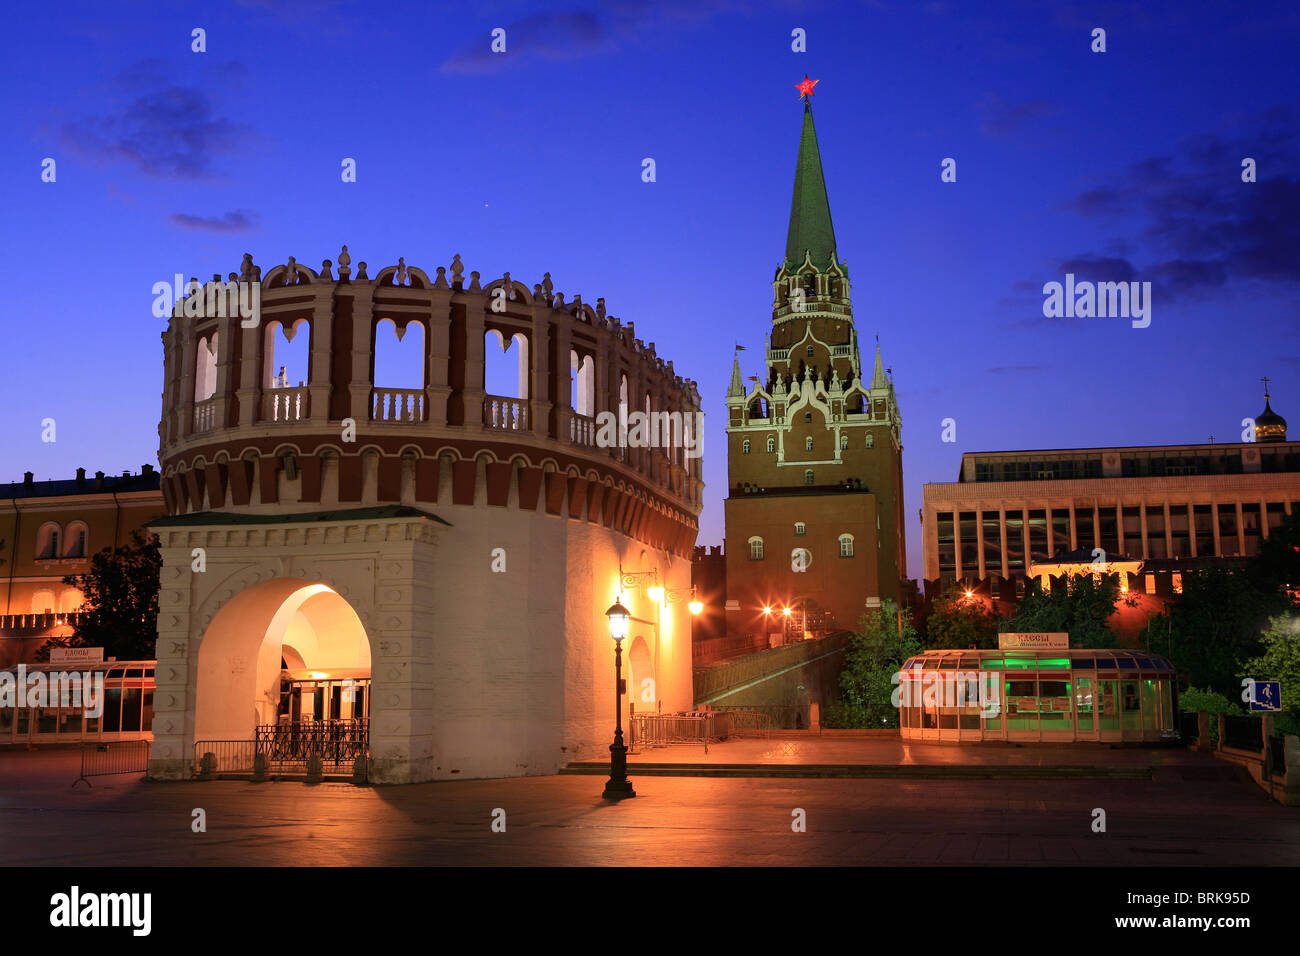 The Kutafiya Tower (1516), Trinity Tower (1495-1499) and State Kremlin Palace of the Kremlin in Moscow, Russia Stock Photo